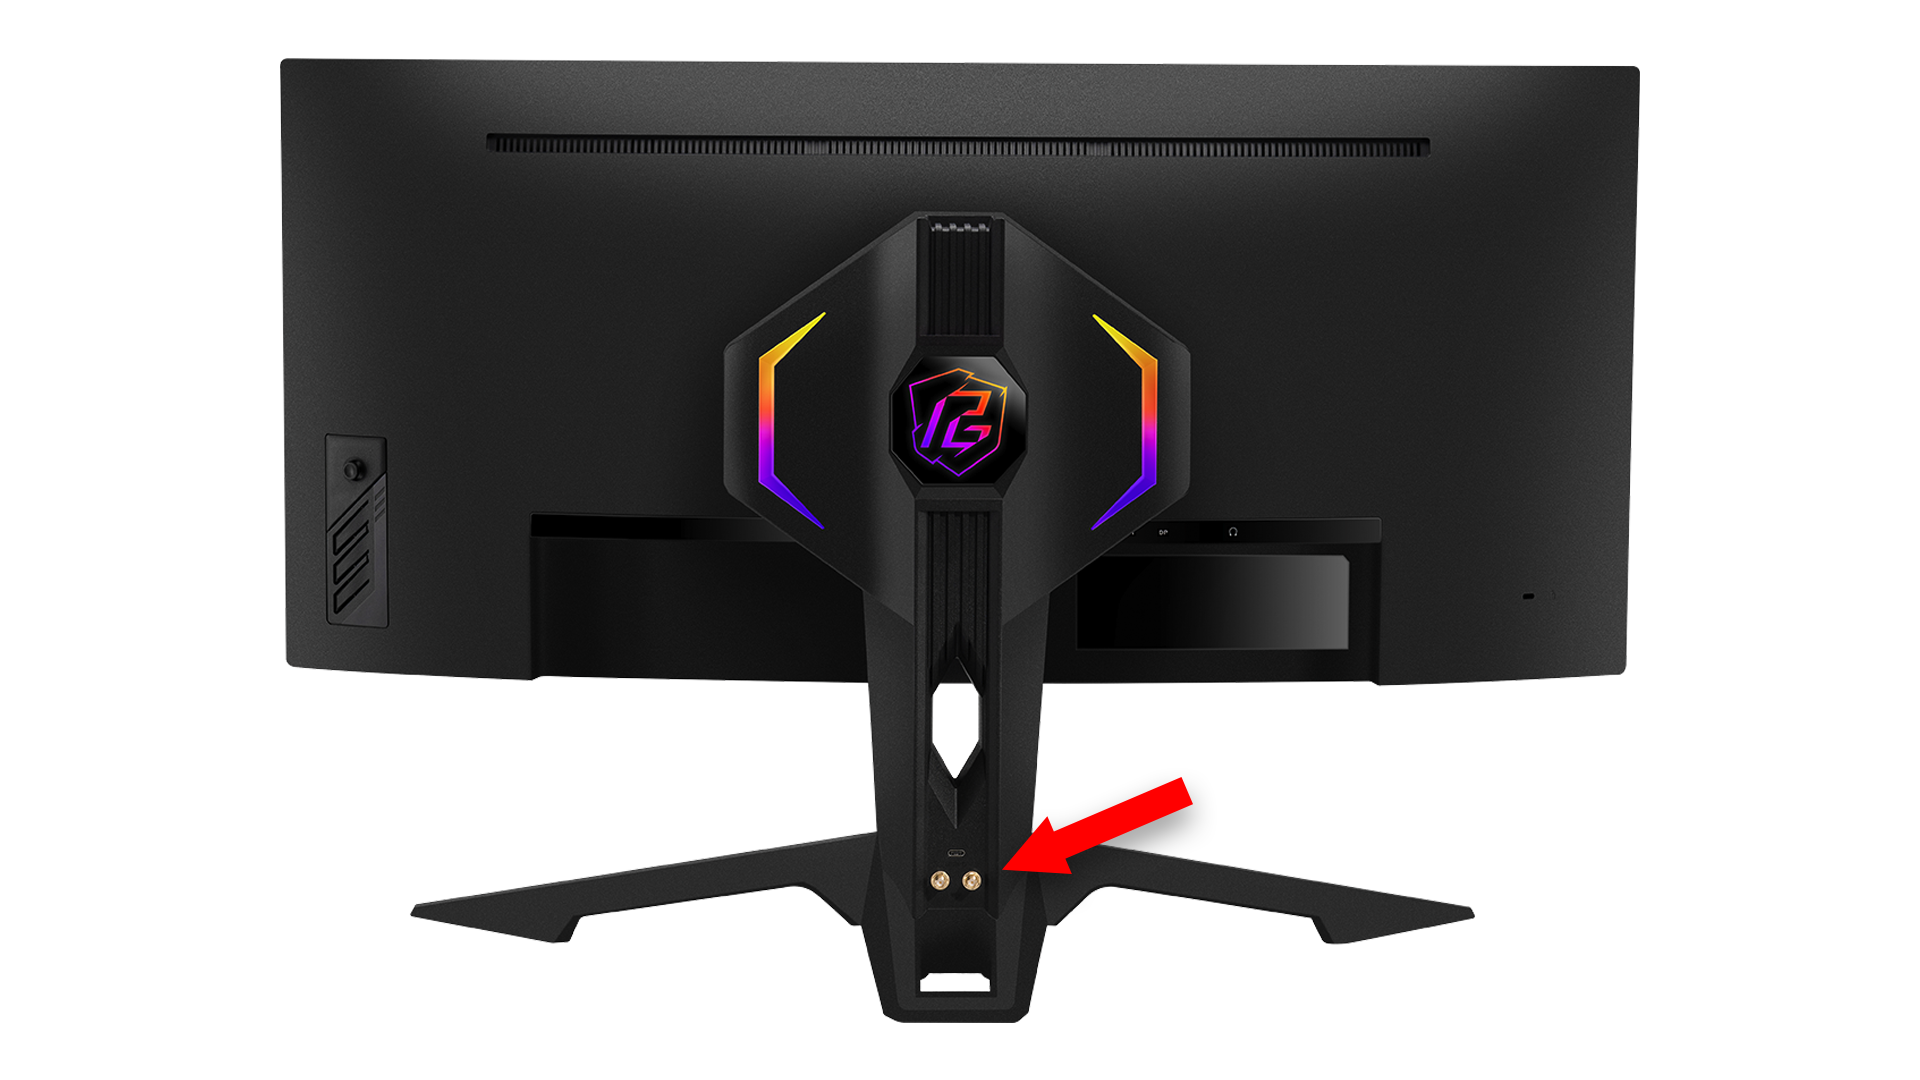 Rear view of ASRock PG34WQ15R3A gaming monitor with SMA antenna connectors highlighted.